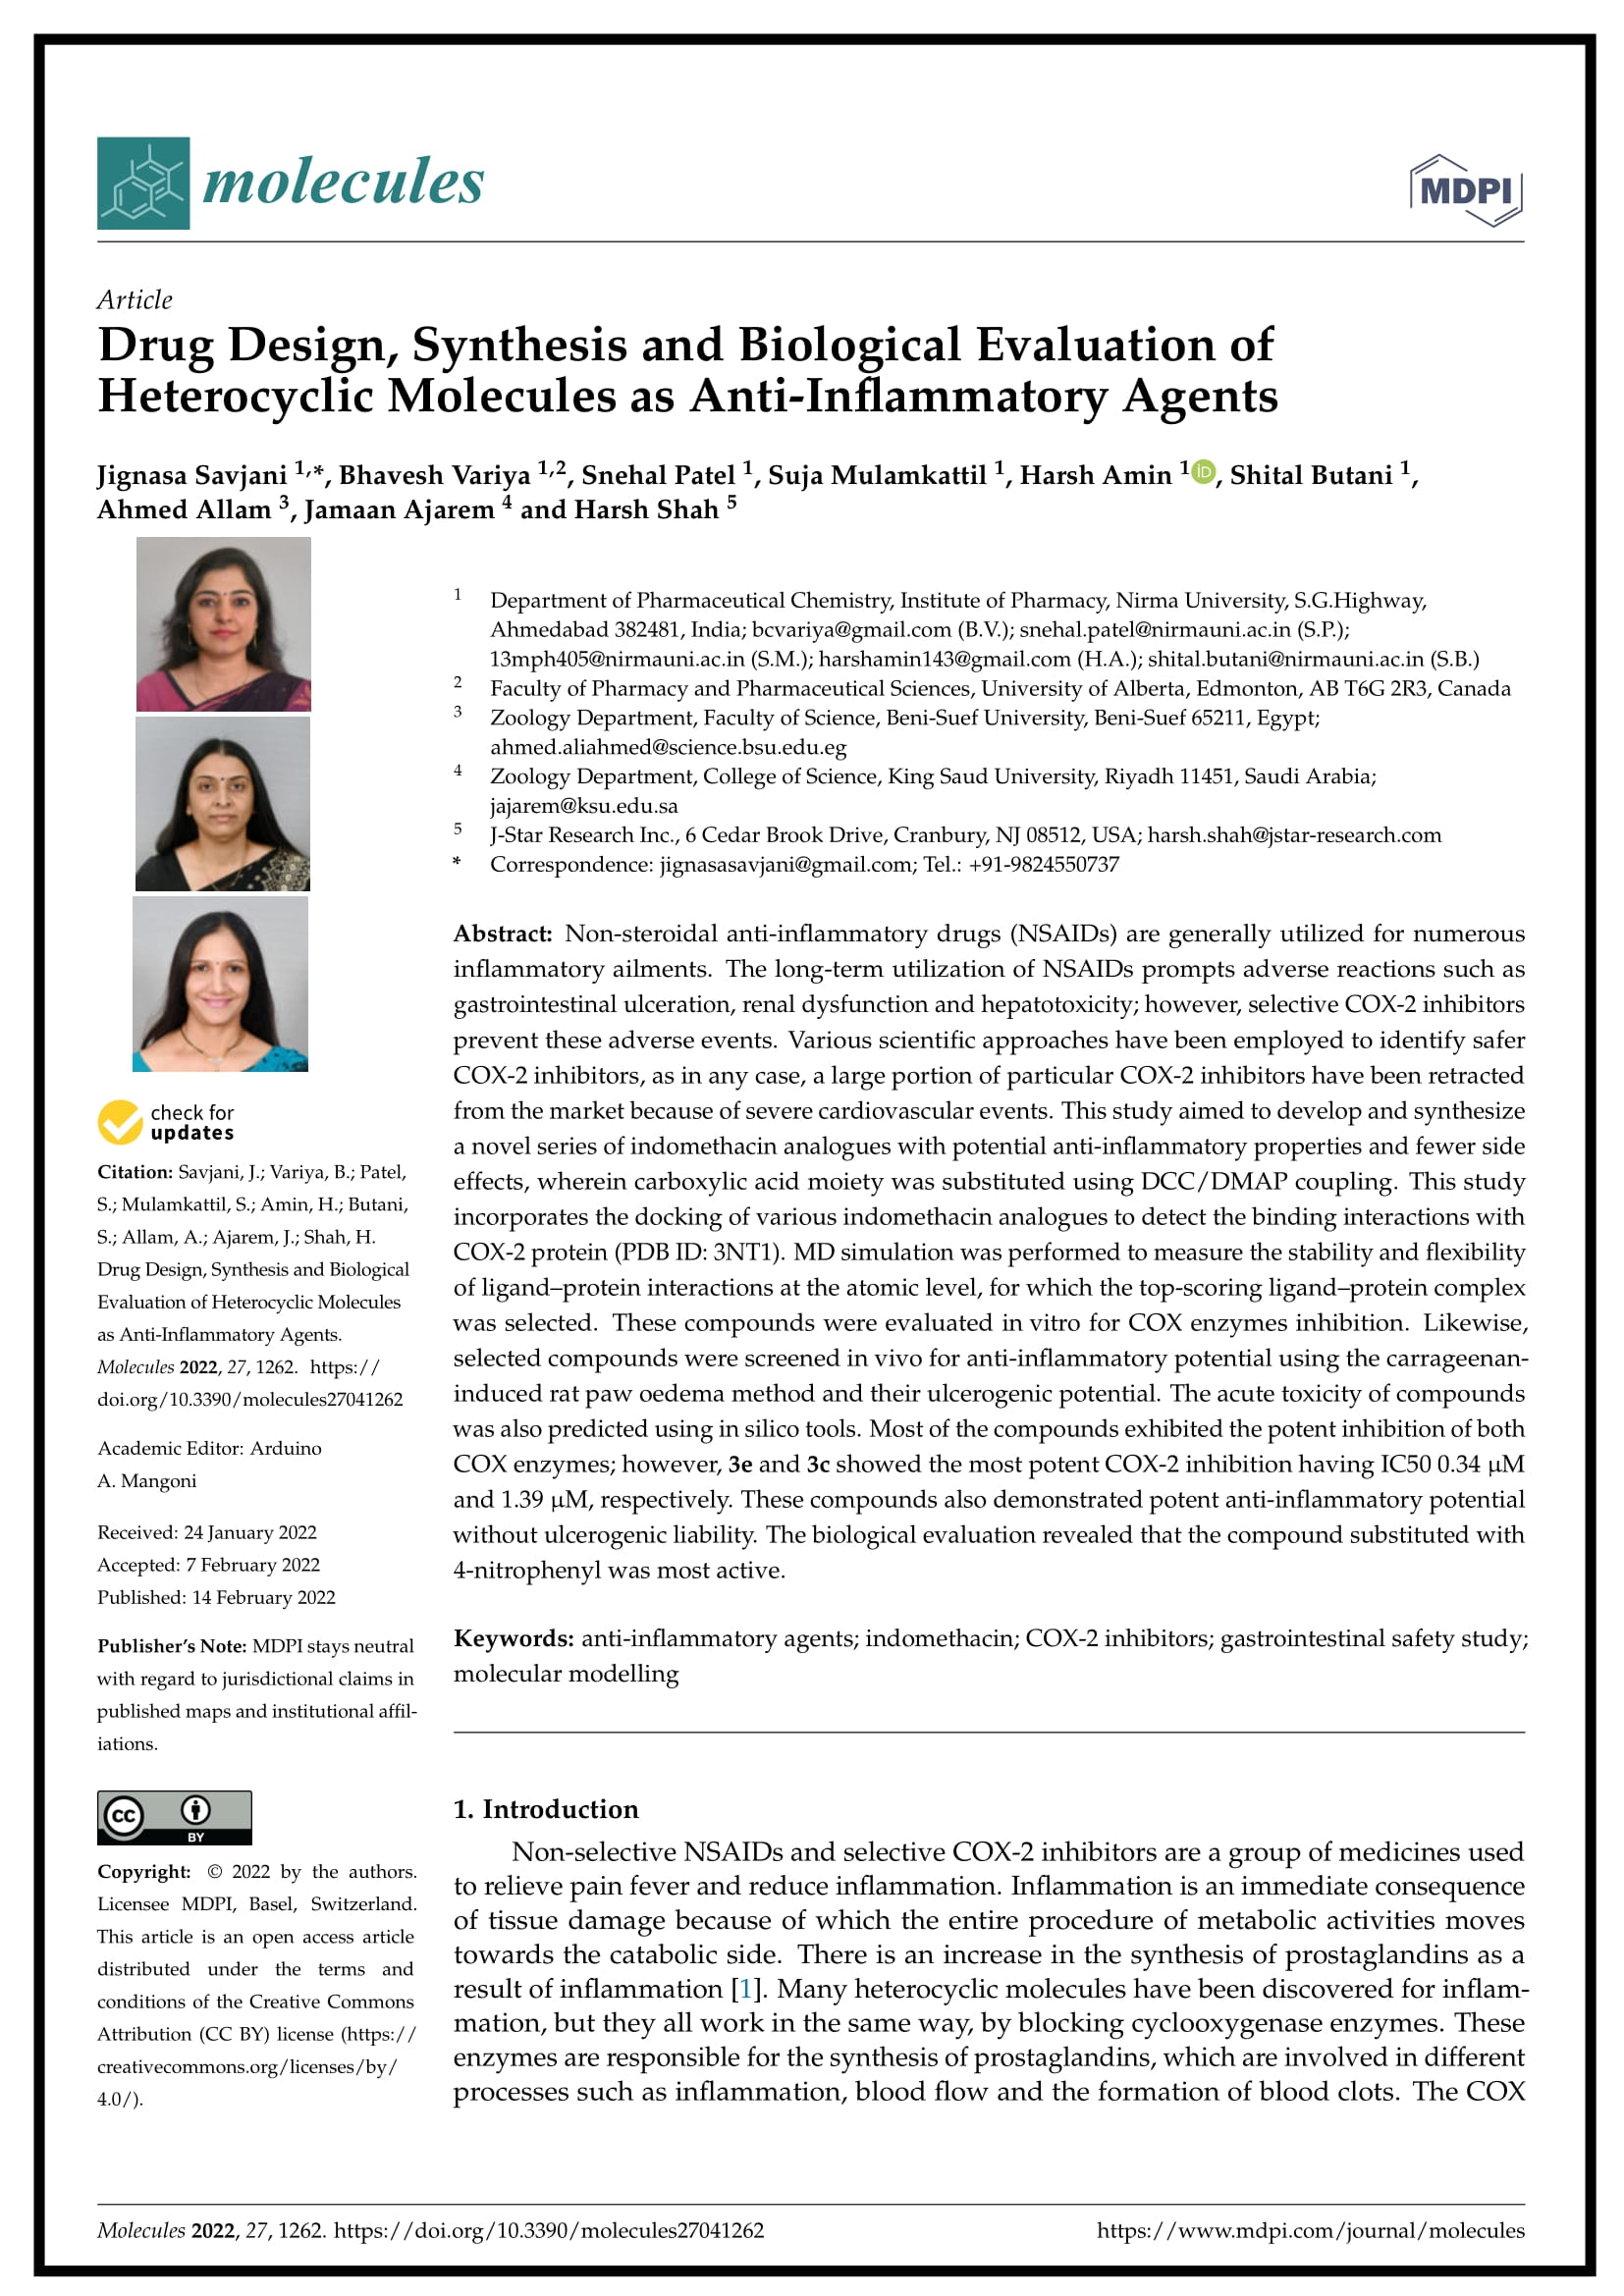 Drug Design, Synthesis and Biological Evaluation of Heterocyclic Molecules as Anti-Inflammatory Agents